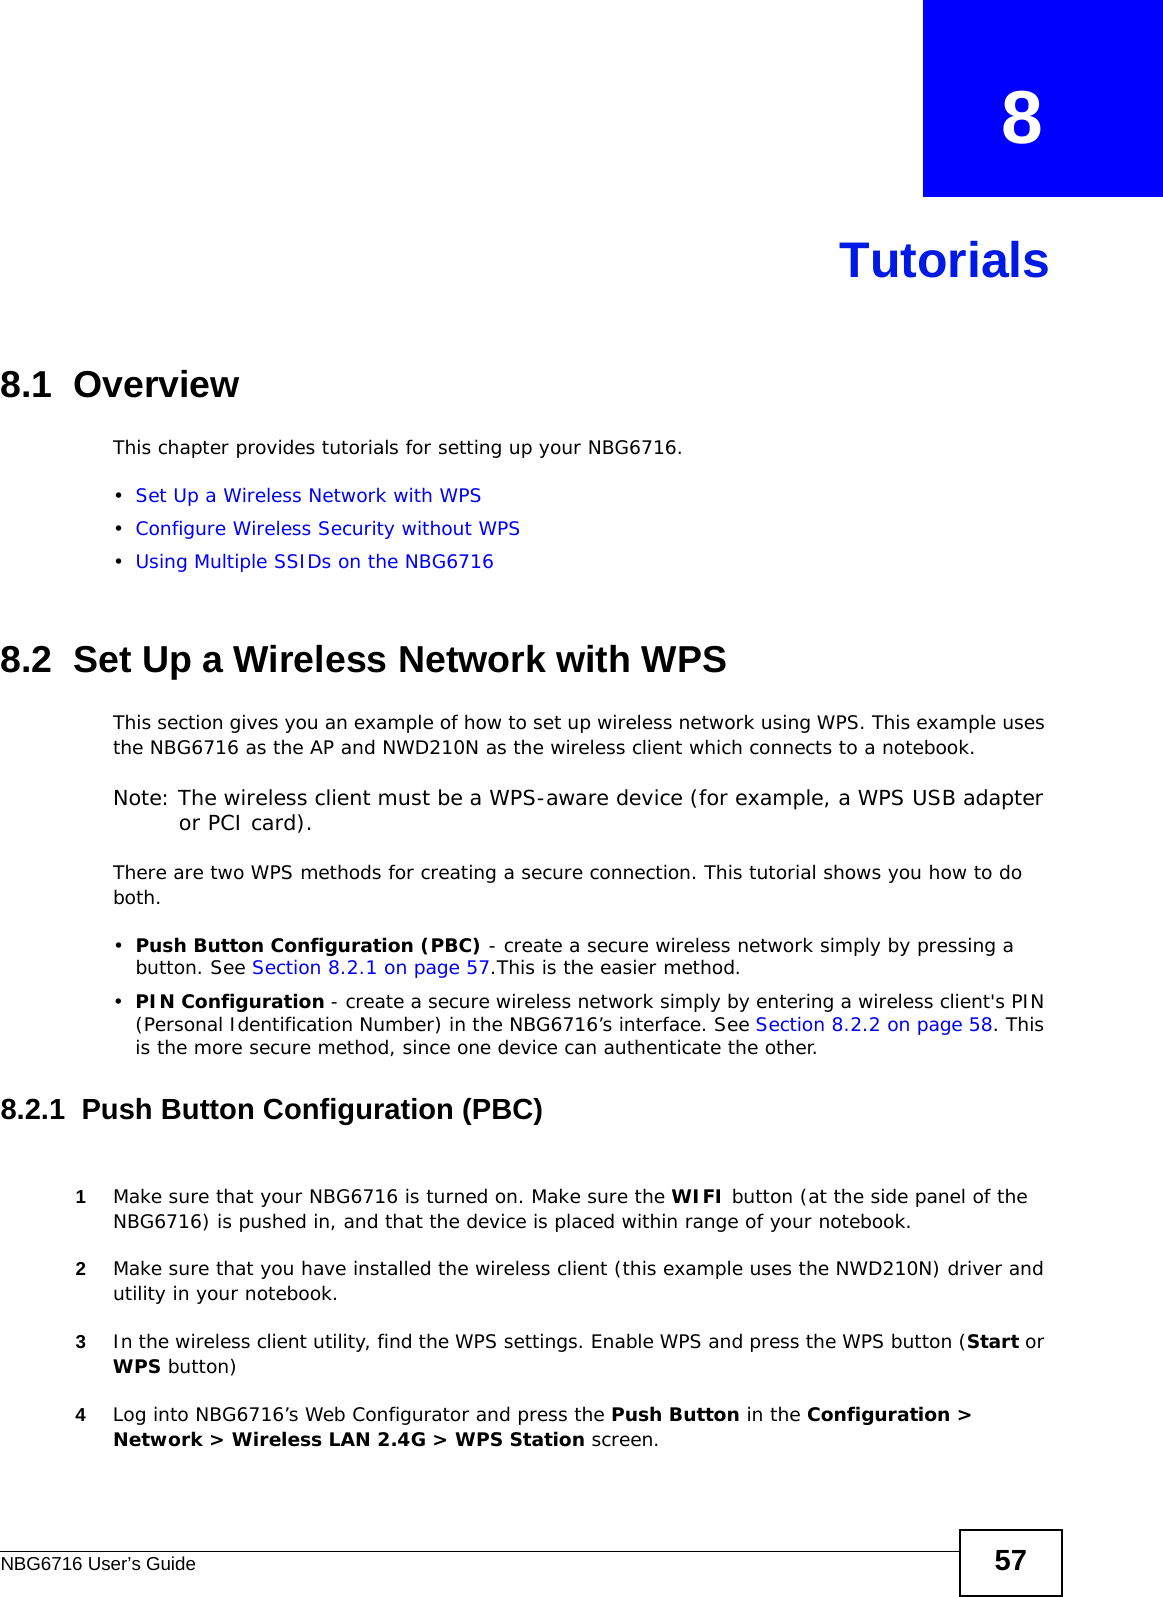 NBG6716 User’s Guide 57CHAPTER   8Tutorials8.1  OverviewThis chapter provides tutorials for setting up your NBG6716.•Set Up a Wireless Network with WPS•Configure Wireless Security without WPS•Using Multiple SSIDs on the NBG67168.2  Set Up a Wireless Network with WPSThis section gives you an example of how to set up wireless network using WPS. This example uses the NBG6716 as the AP and NWD210N as the wireless client which connects to a notebook. Note: The wireless client must be a WPS-aware device (for example, a WPS USB adapter or PCI card).There are two WPS methods for creating a secure connection. This tutorial shows you how to do both.•Push Button Configuration (PBC) - create a secure wireless network simply by pressing a button. See Section 8.2.1 on page 57.This is the easier method.•PIN Configuration - create a secure wireless network simply by entering a wireless client&apos;s PIN (Personal Identification Number) in the NBG6716’s interface. See Section 8.2.2 on page 58. This is the more secure method, since one device can authenticate the other.8.2.1  Push Button Configuration (PBC)1Make sure that your NBG6716 is turned on. Make sure the WIFI button (at the side panel of the NBG6716) is pushed in, and that the device is placed within range of your notebook. 2Make sure that you have installed the wireless client (this example uses the NWD210N) driver and utility in your notebook.3In the wireless client utility, find the WPS settings. Enable WPS and press the WPS button (Start or WPS button)4Log into NBG6716’s Web Configurator and press the Push Button in the Configuration &gt; Network &gt; Wireless LAN 2.4G &gt; WPS Station screen. 